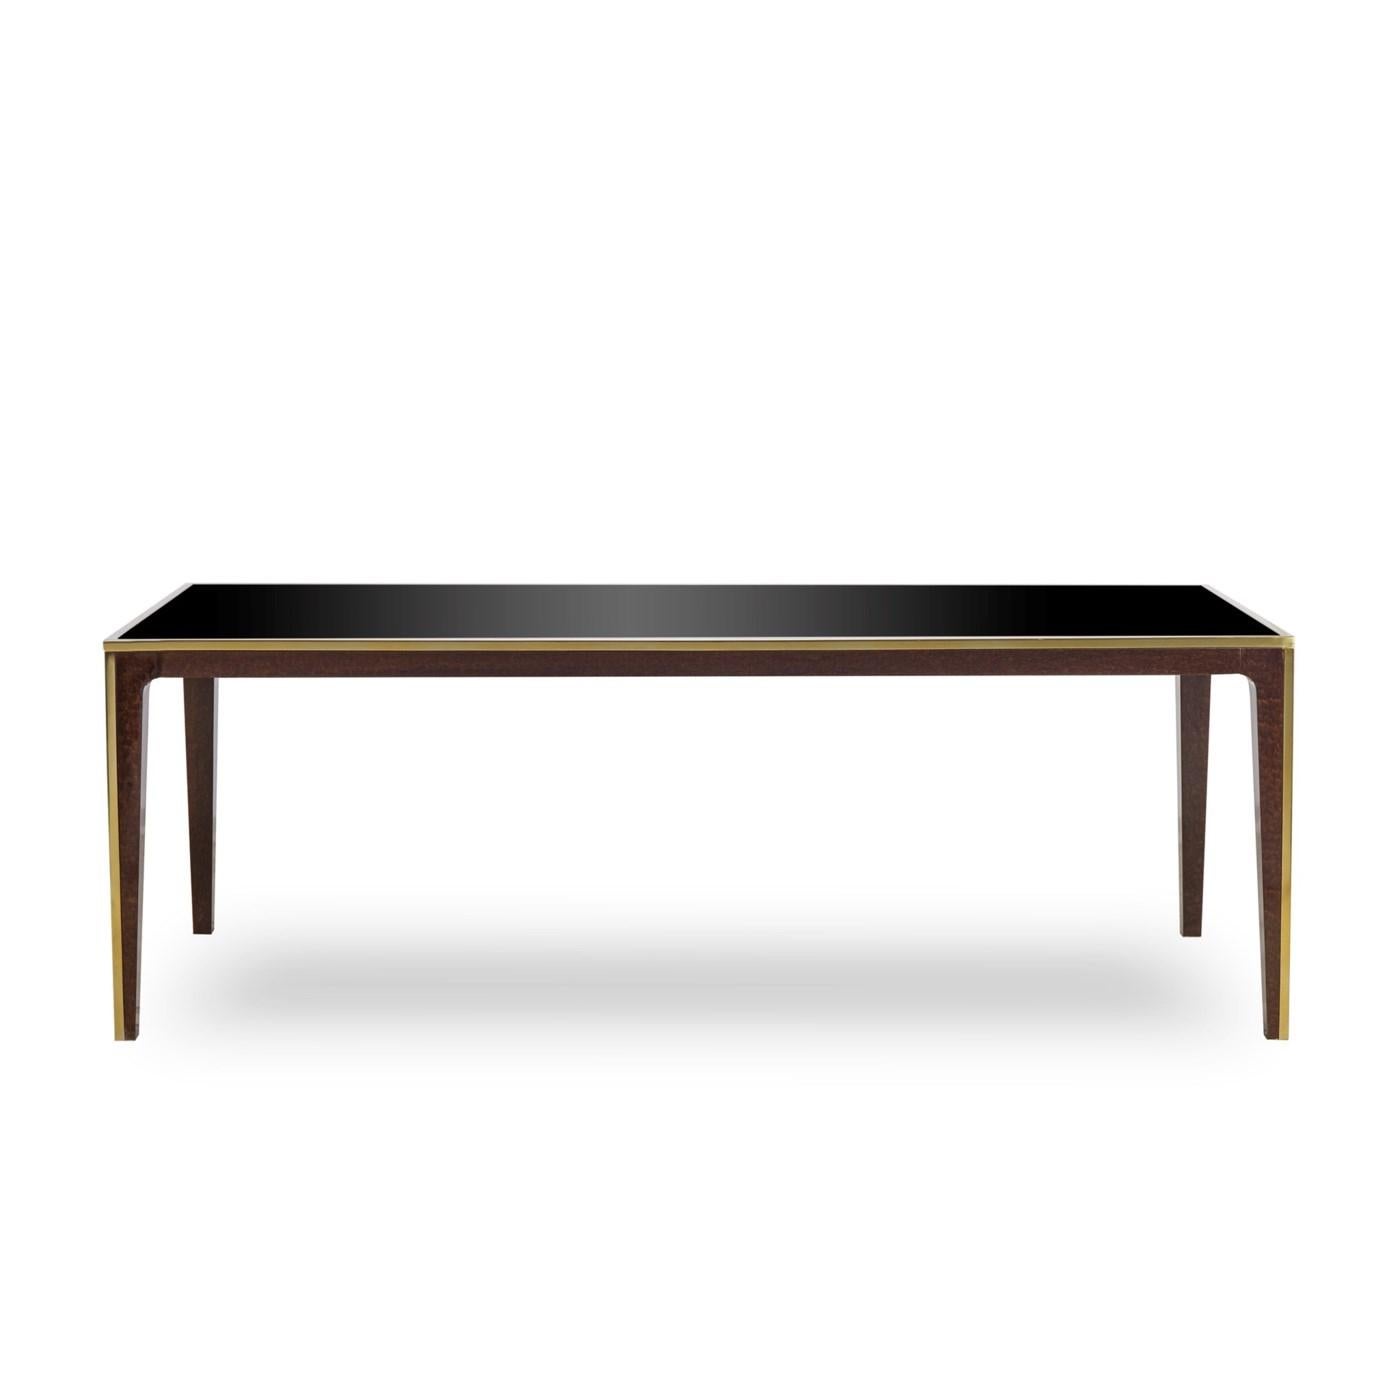 Dining table accent with structure in solid beechwood
with eucalyptus veneer. With smoked tempered glass top.
With stainless steel rim in vintage brass finish on feet and
around the top.